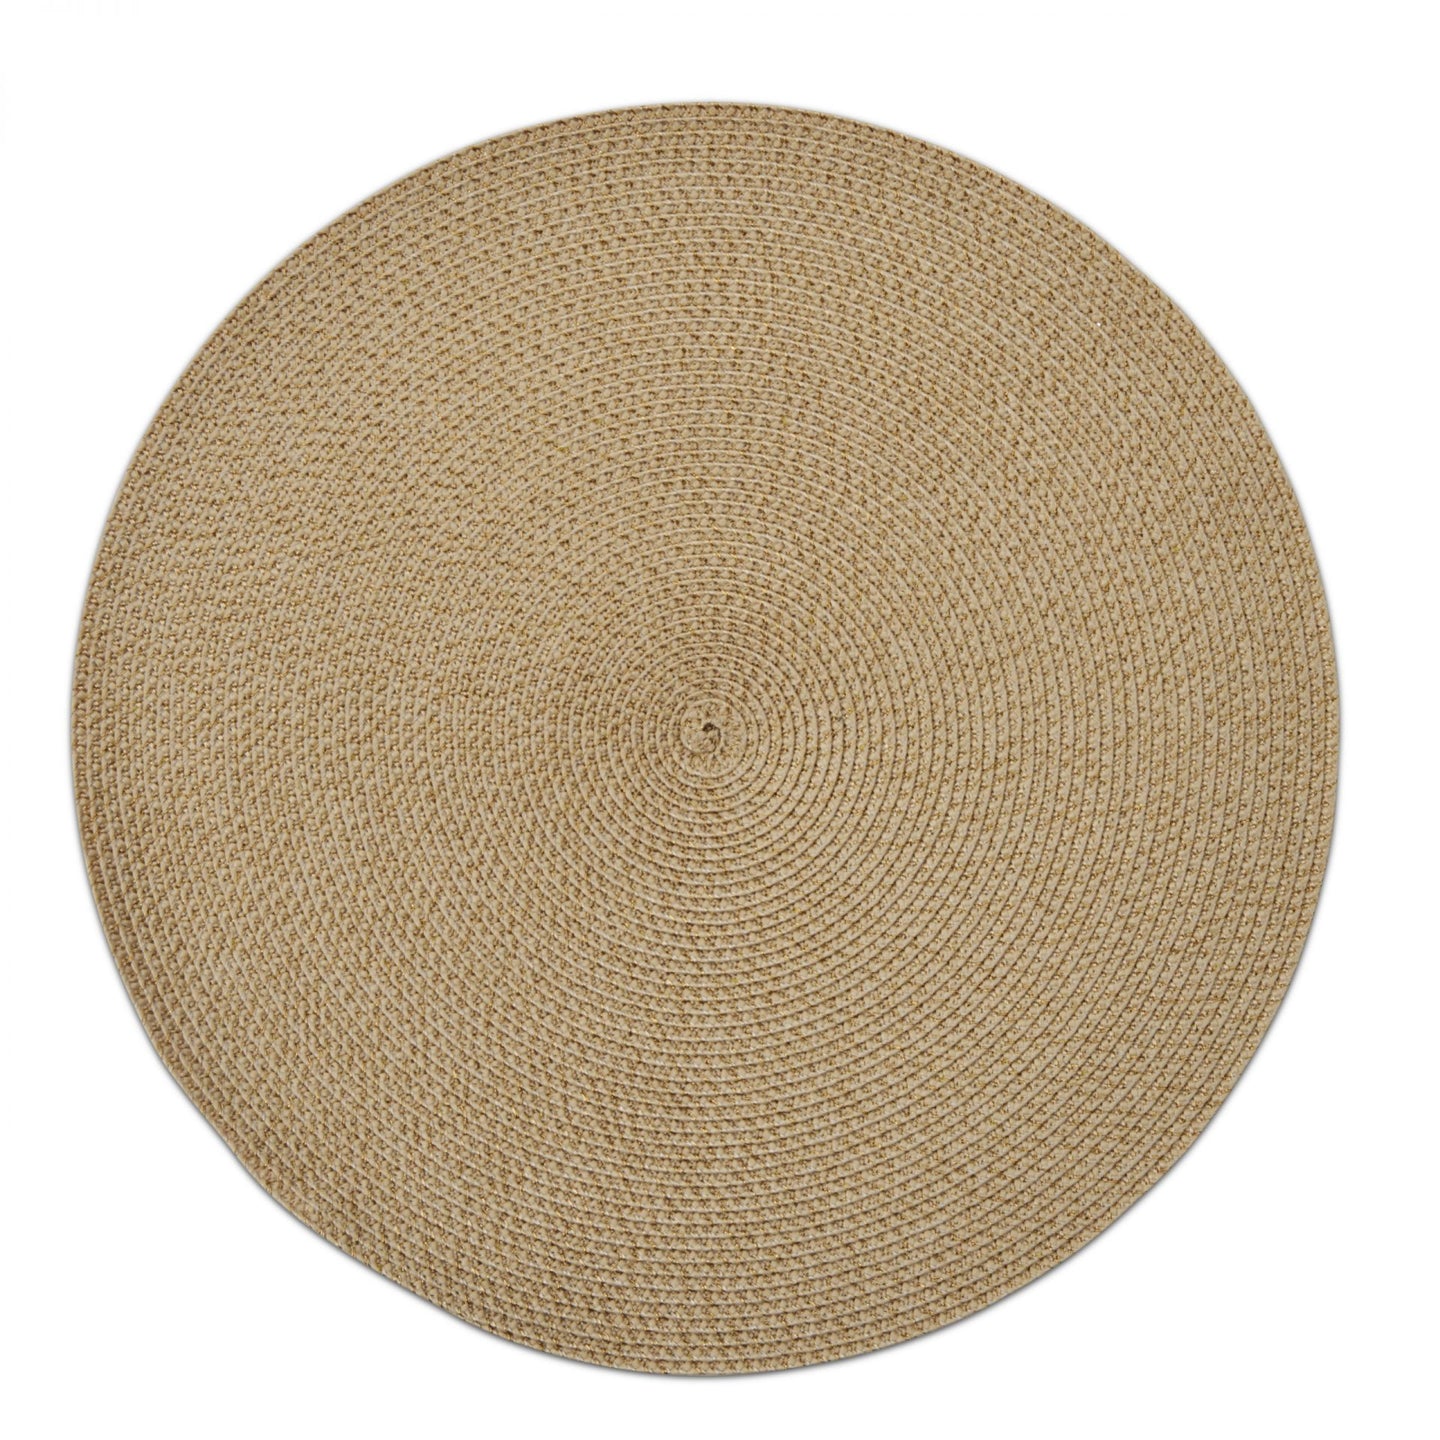 Gold/Sand Casual Luxe Round Braided Placemat